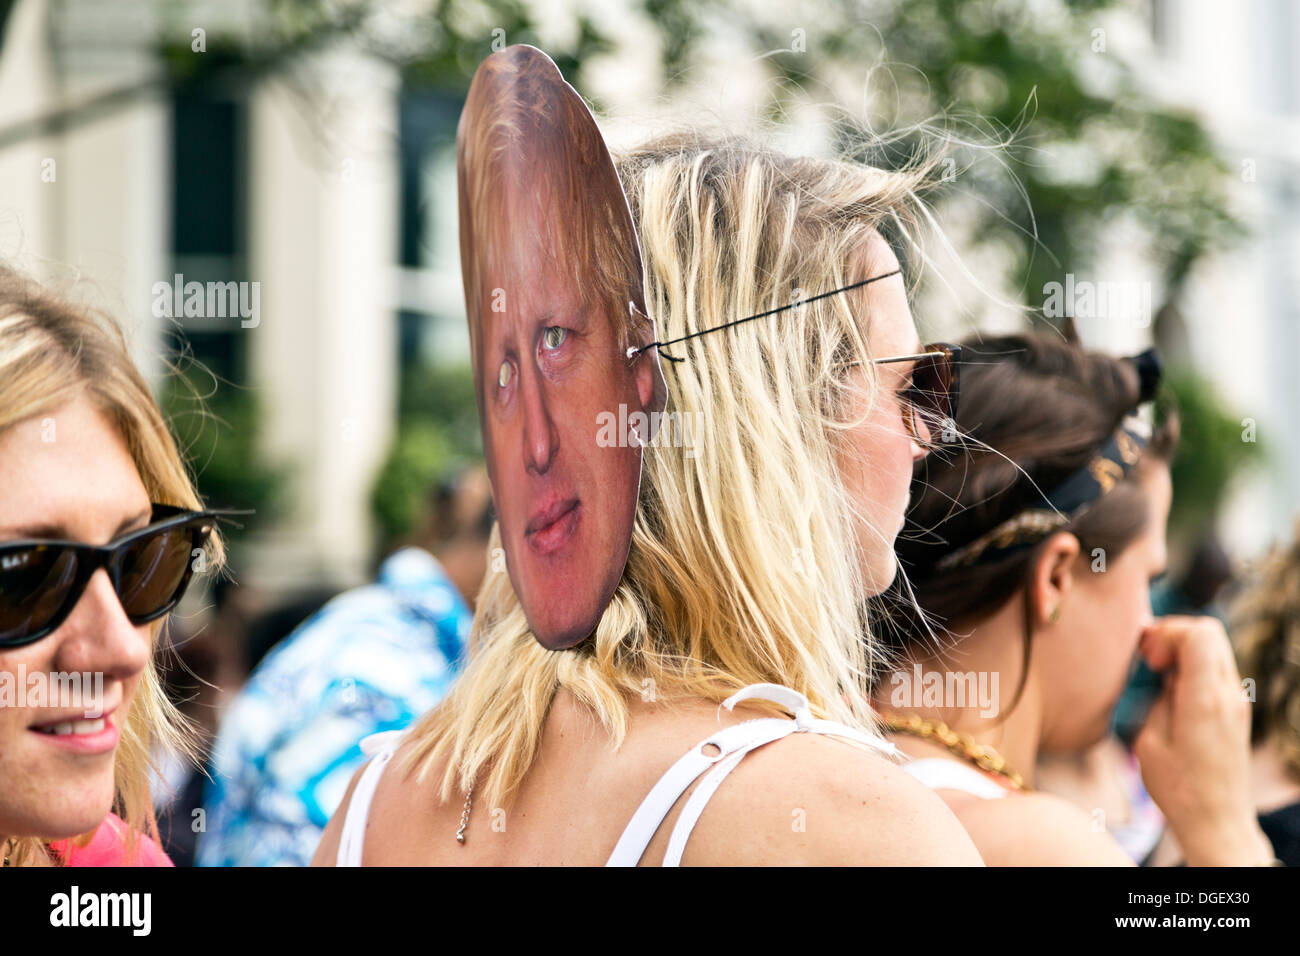 Young woman wearing a Boris Johnson face mask behind her head at the Notting Hill Carnival 2013, London, England Stock Photo